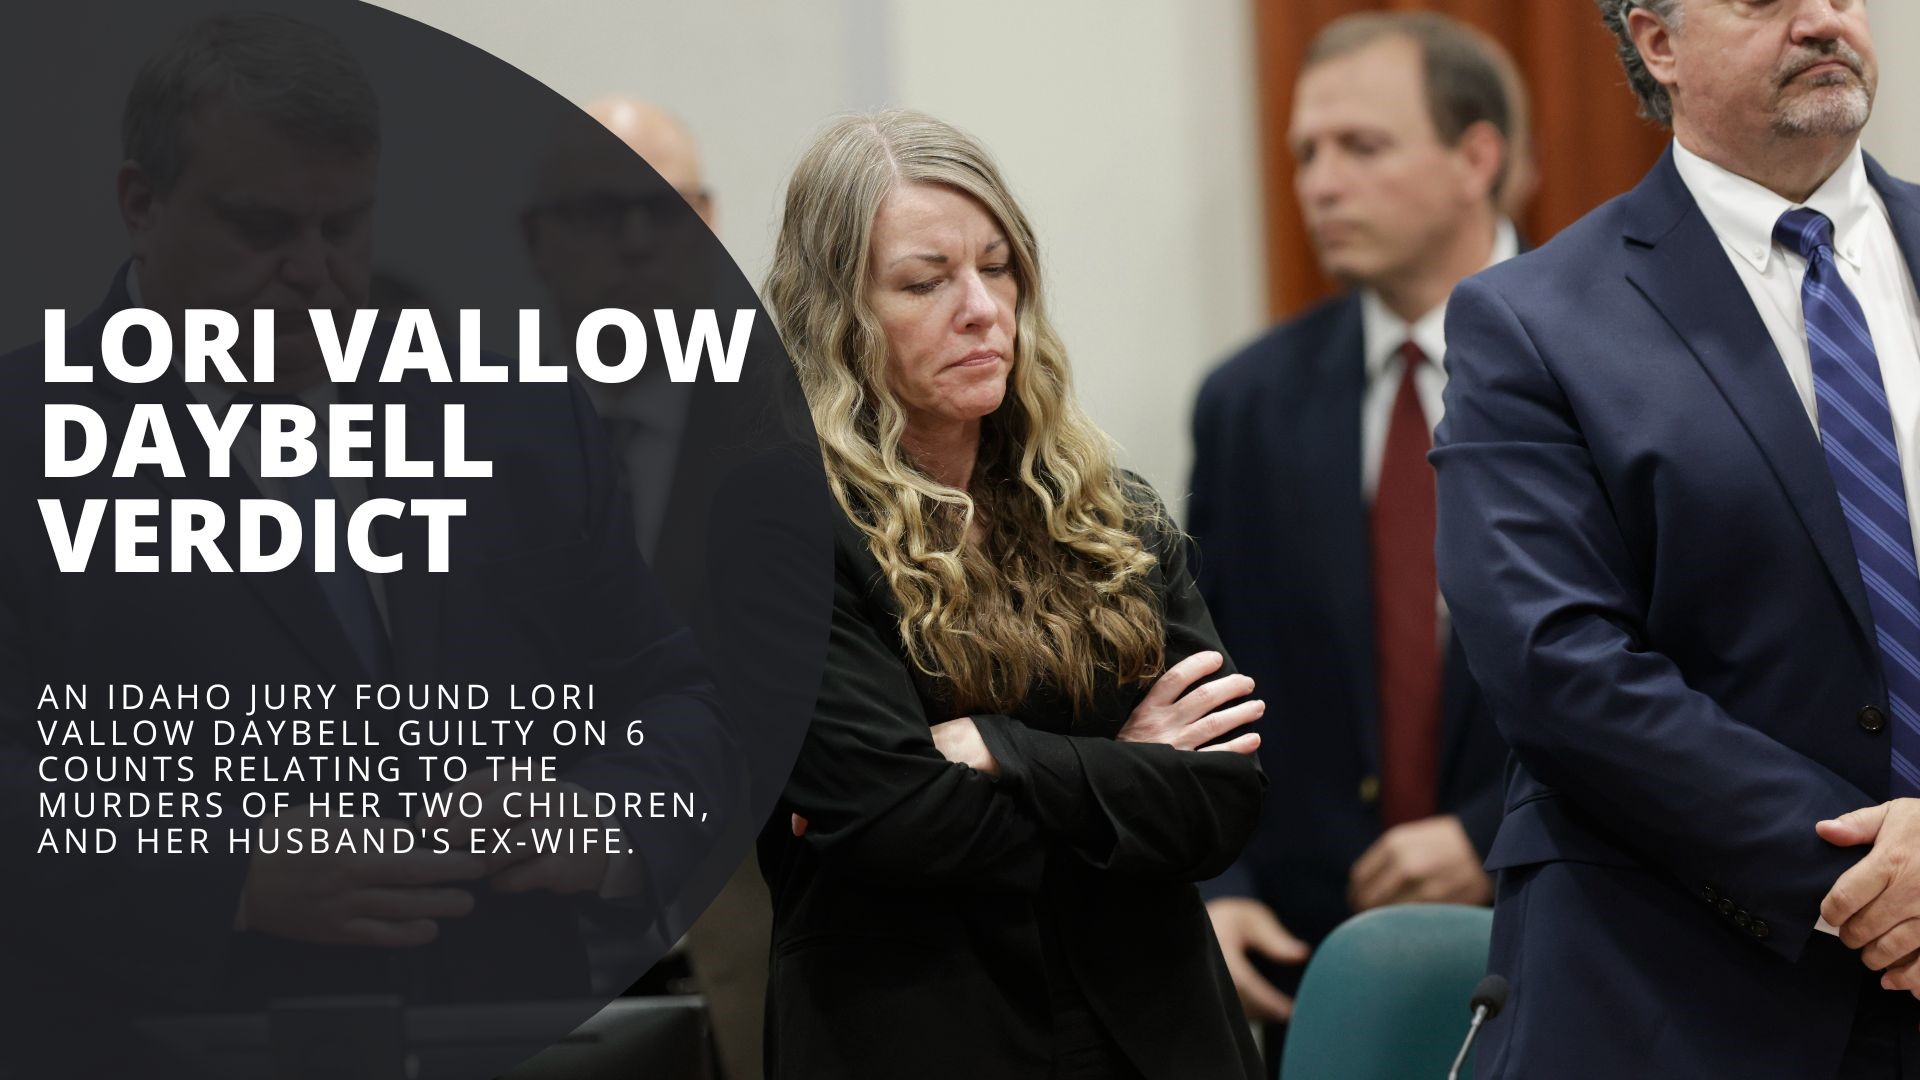 An Idaho jury found Lori Vallow Daybell guilty on 6 counts in the murder trial for her 2 children and her husband's ex-wife. Hear reaction from family and jurors.